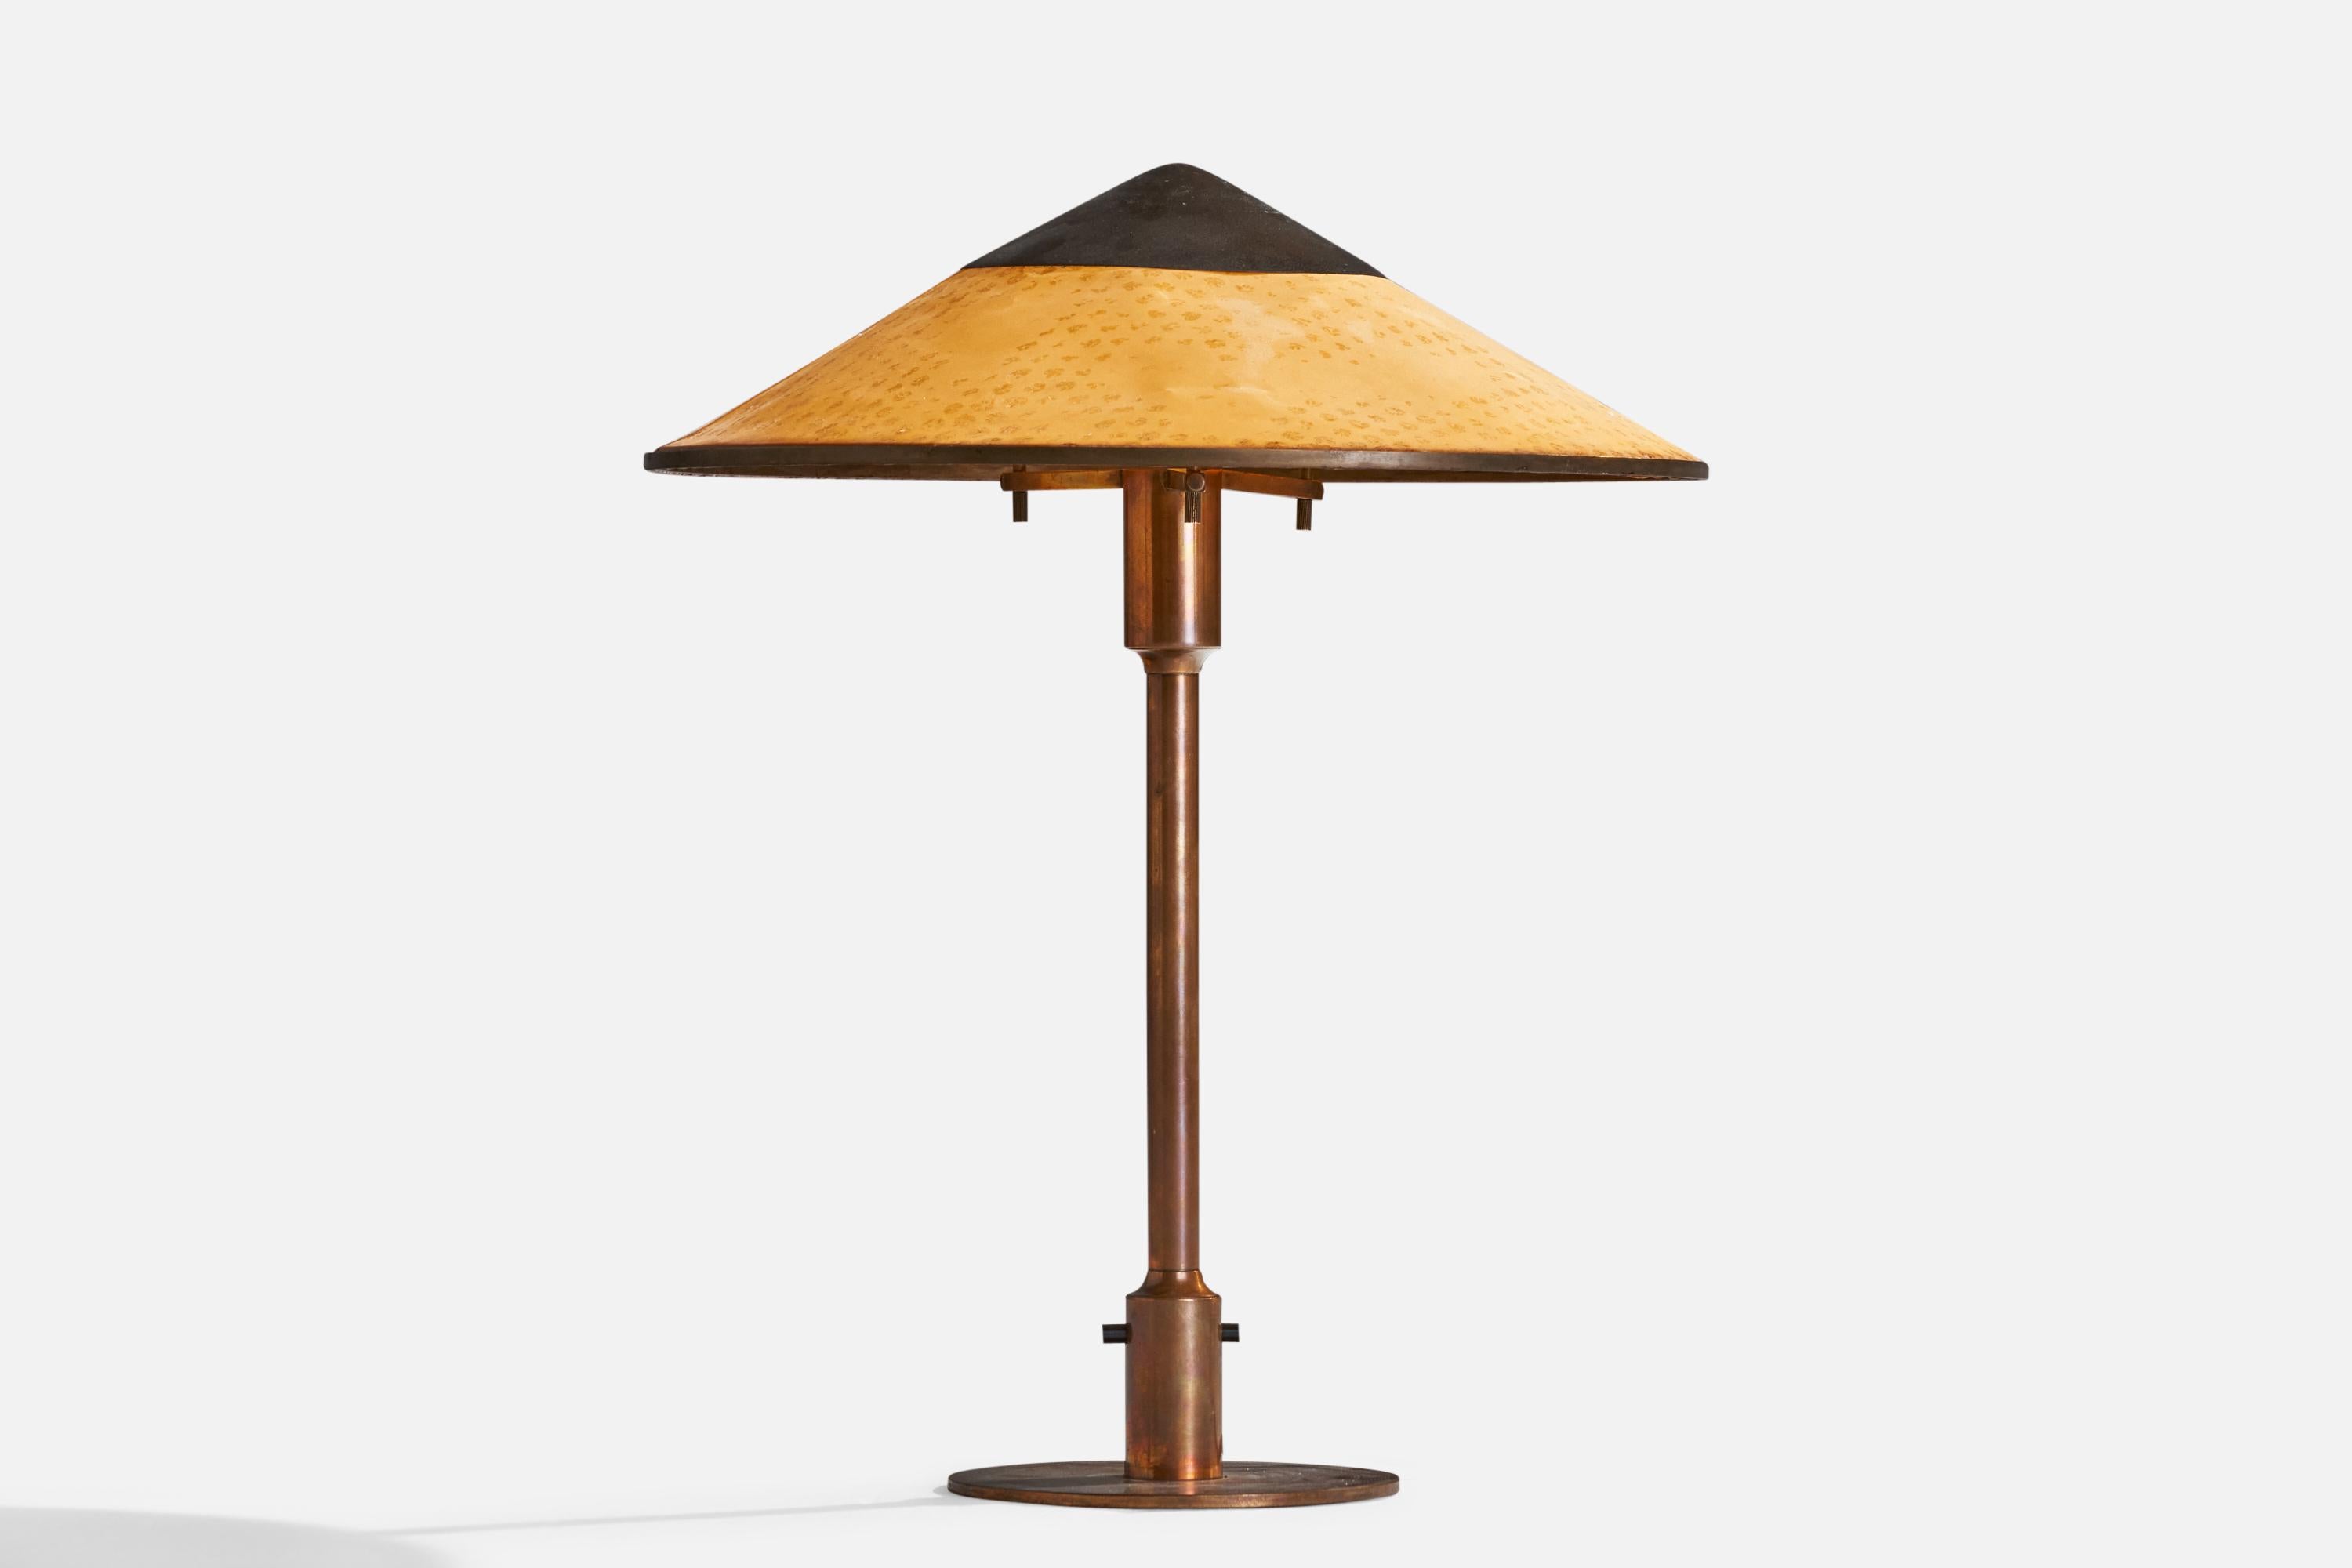 A copper and orange waxed paper table lamp designed and produced by Niels Rasmussen Thykier, Denmark, 1930s.

Overall Dimensions (inches): 19.5” H 14.5” Diameter
Bulb Specifications: E-26 Bulb
Number of Sockets: 1
All lighting will be converted for